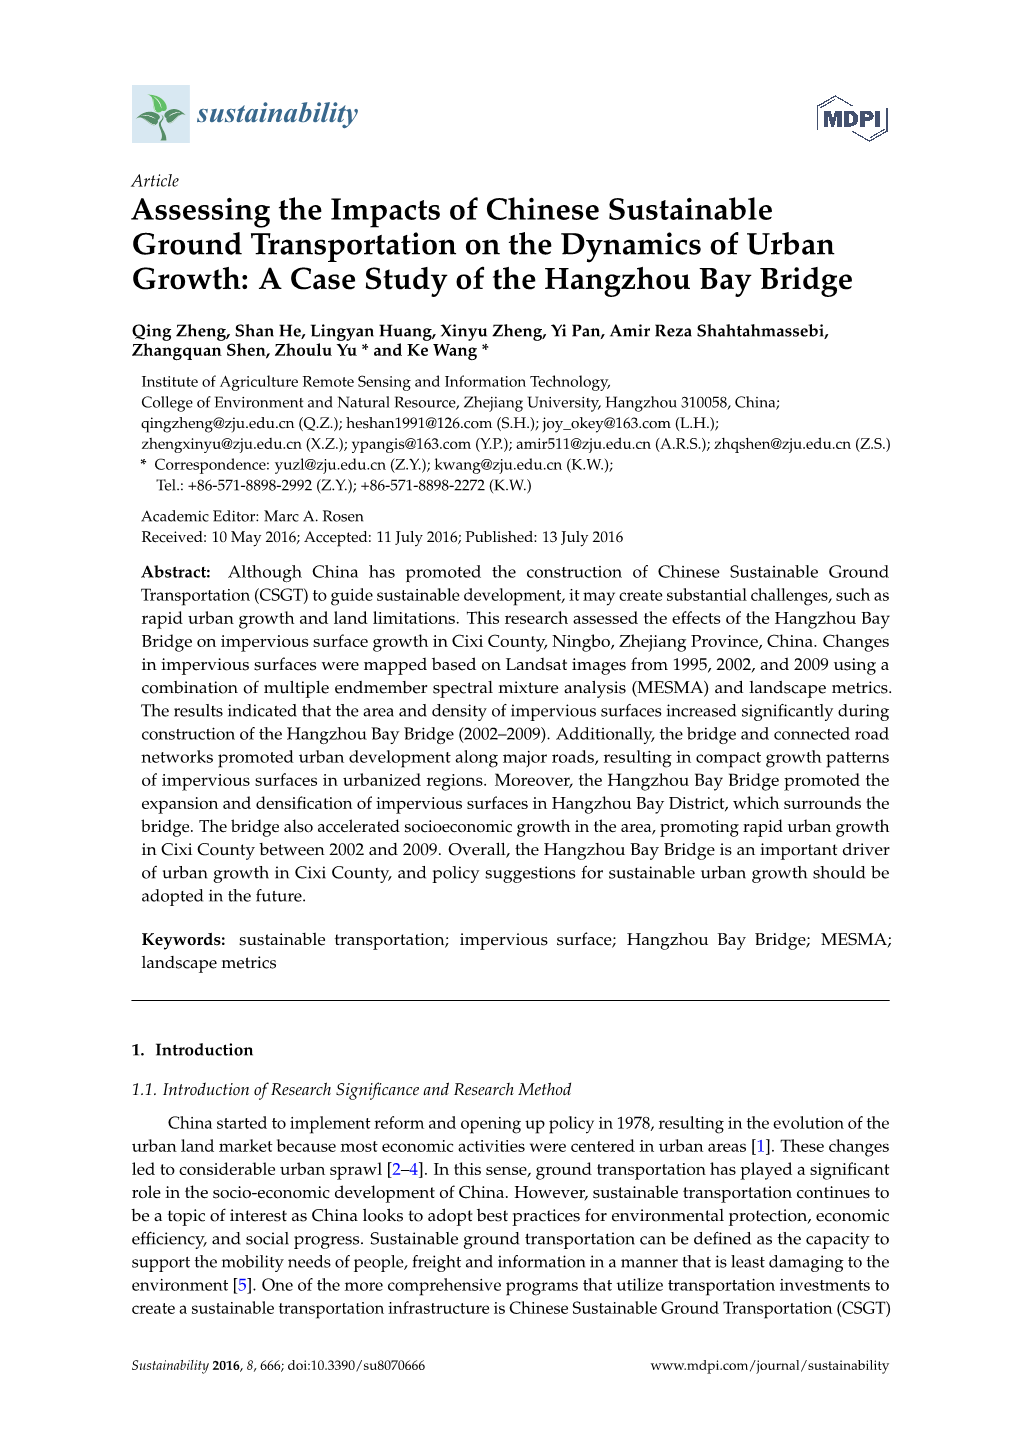 Assessing the Impacts of Chinese Sustainable Ground Transportation on the Dynamics of Urban Growth: a Case Study of the Hangzhou Bay Bridge